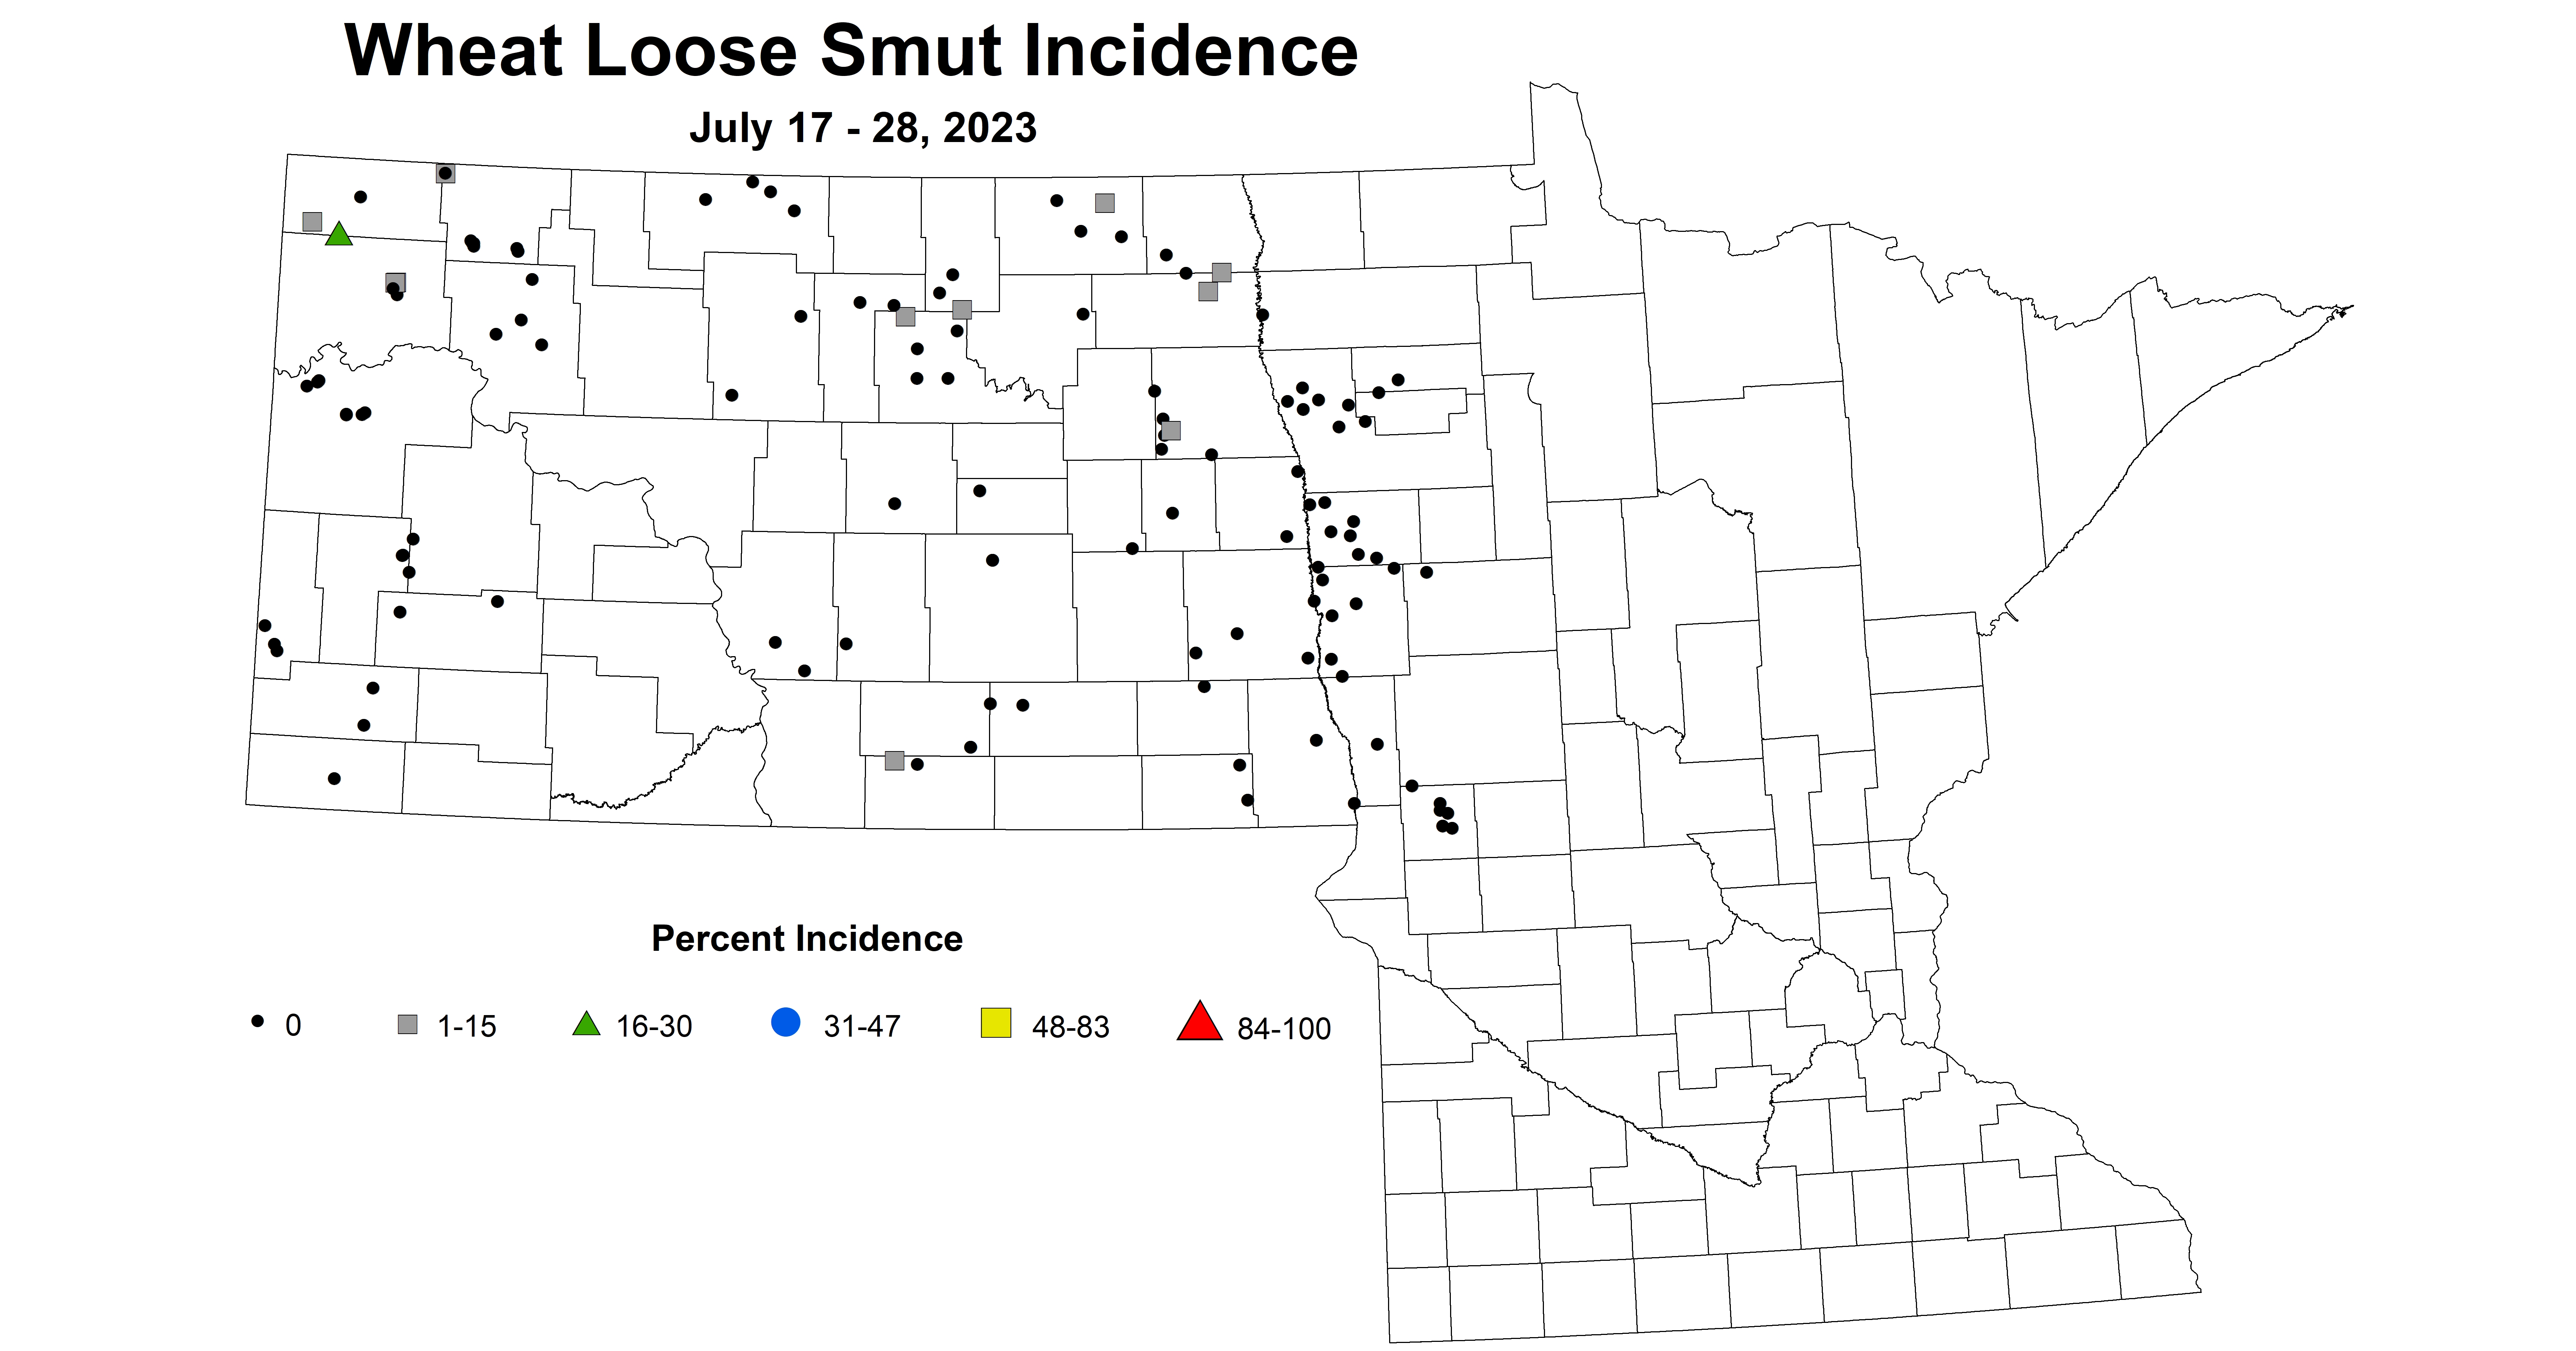 wheat loose smut incidence July 17-28 2023